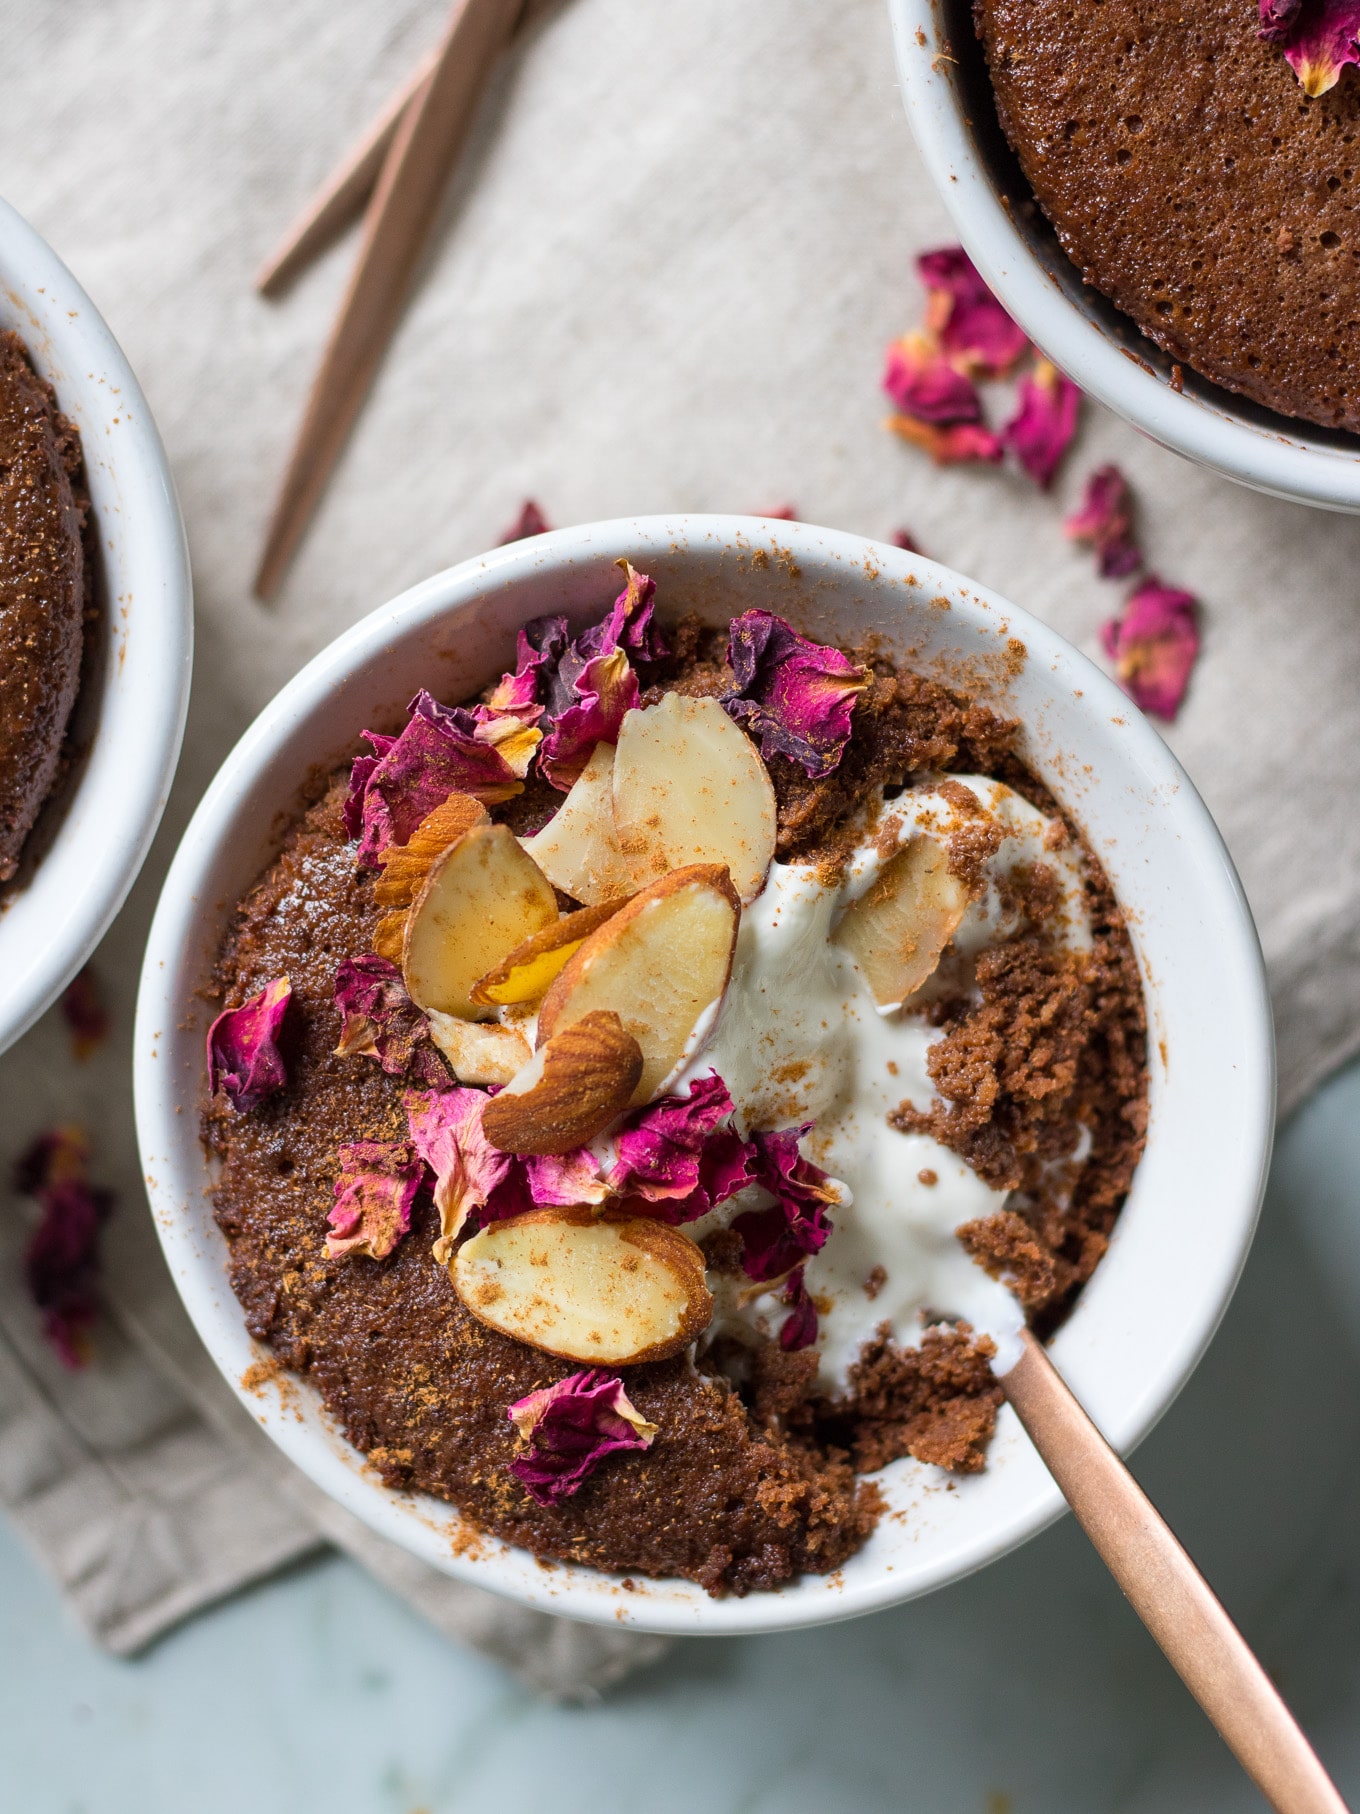 This gorgeous almond chocolate mug cake comes together in MINUTES! Easily made in the microwave, it's gluten free, grain free, dairy free and paleo friendly. #healthy #glutenfree #paleo #mugcake